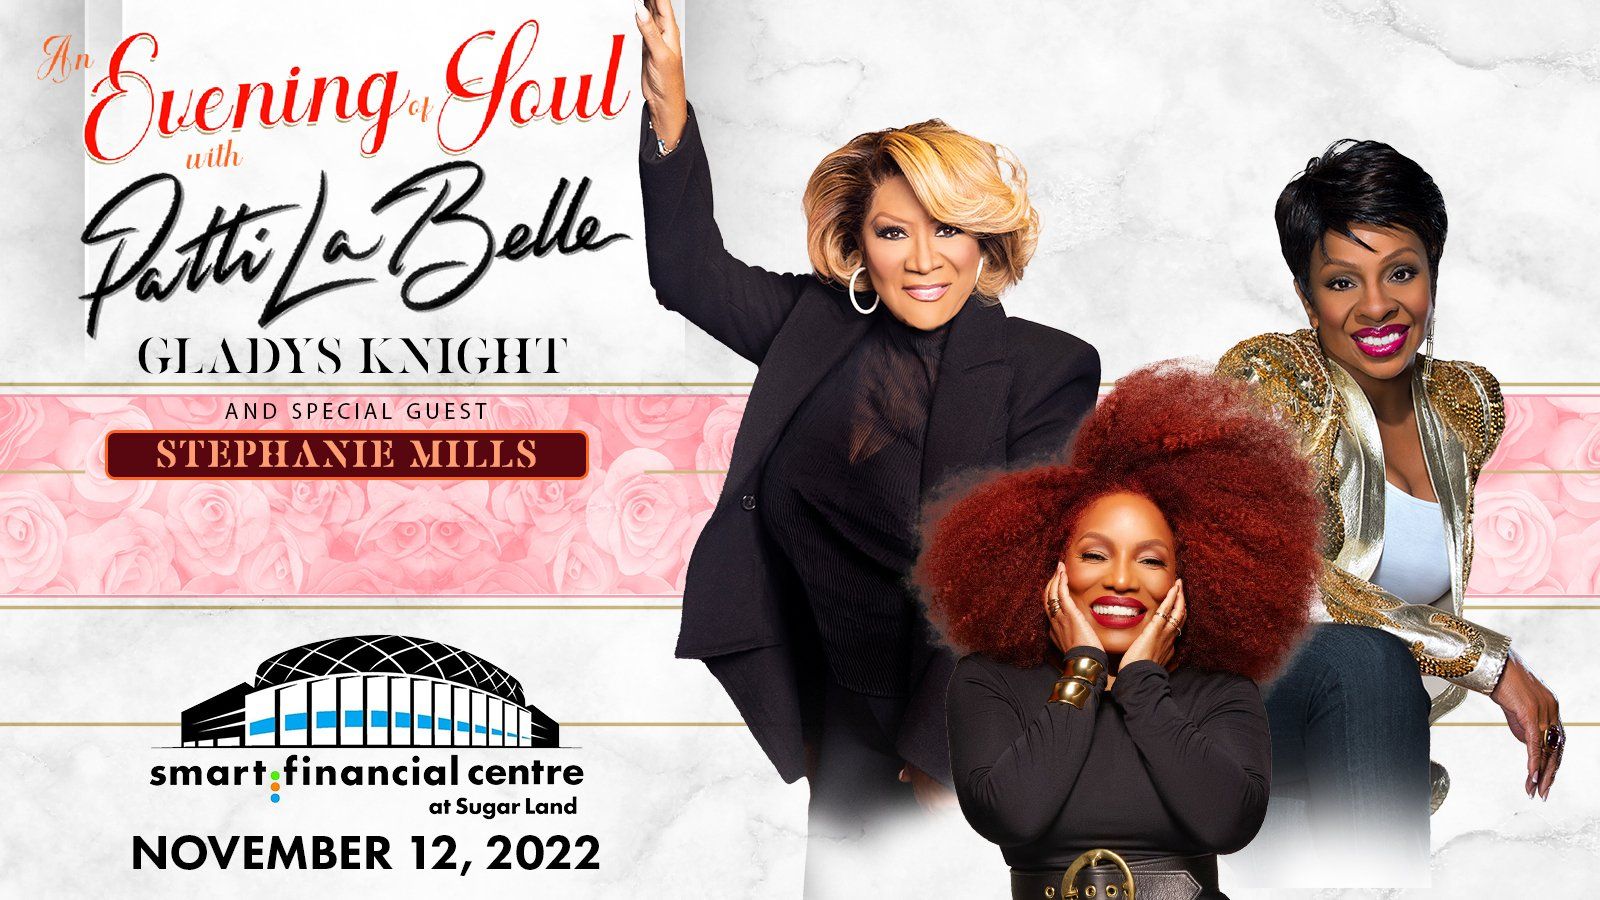 An Evening of Soul with Patti LaBelle